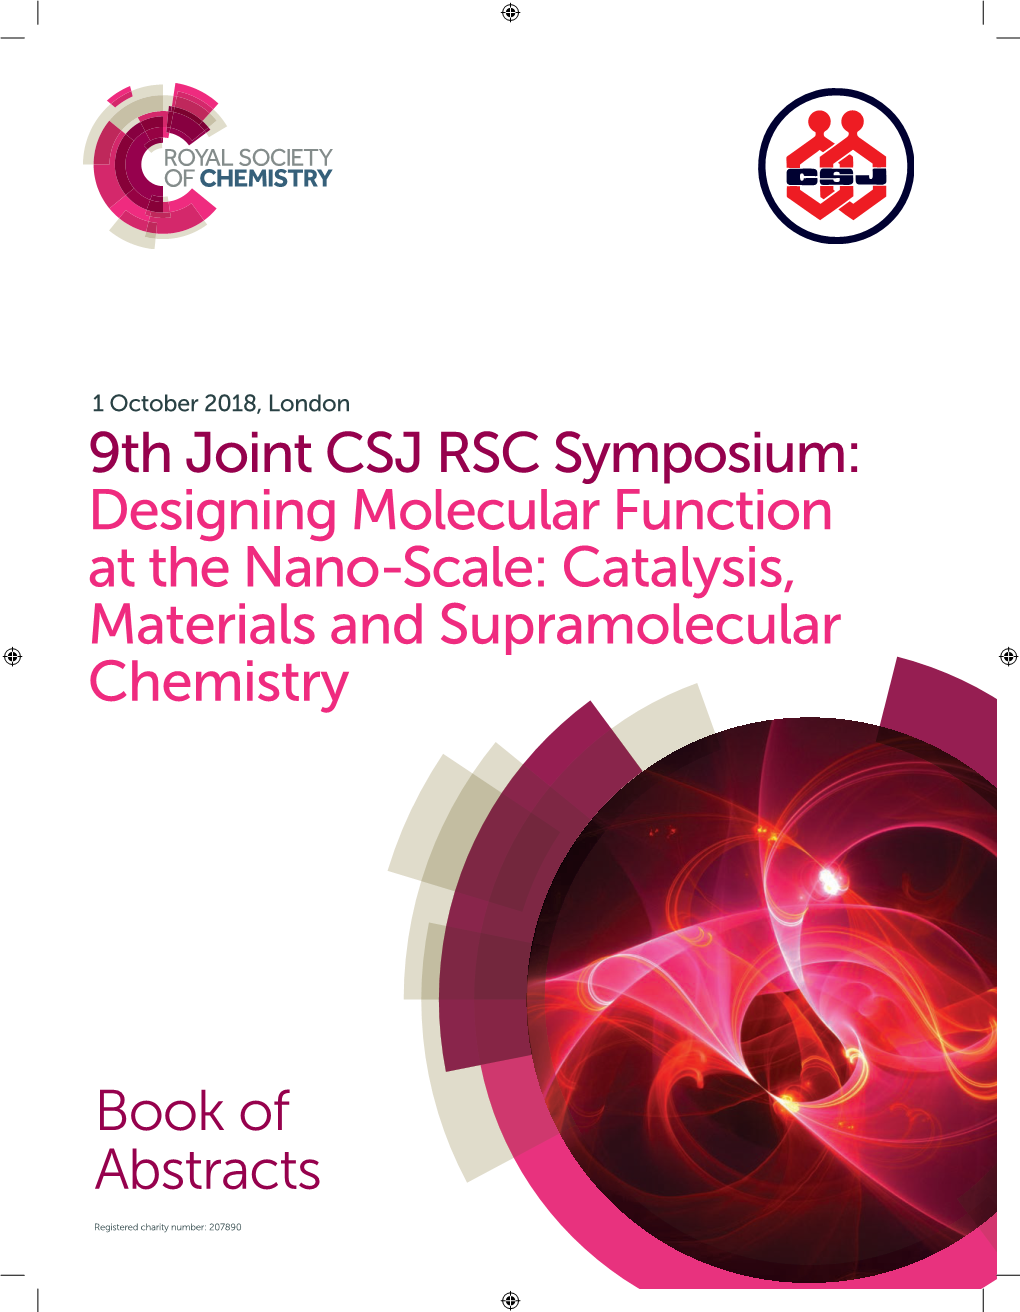 9Th Joint CSJ RSC Symposium: Designing Molecular Function at the Nano-Scale: Catalysis, Materials and Supramolecular Chemistry